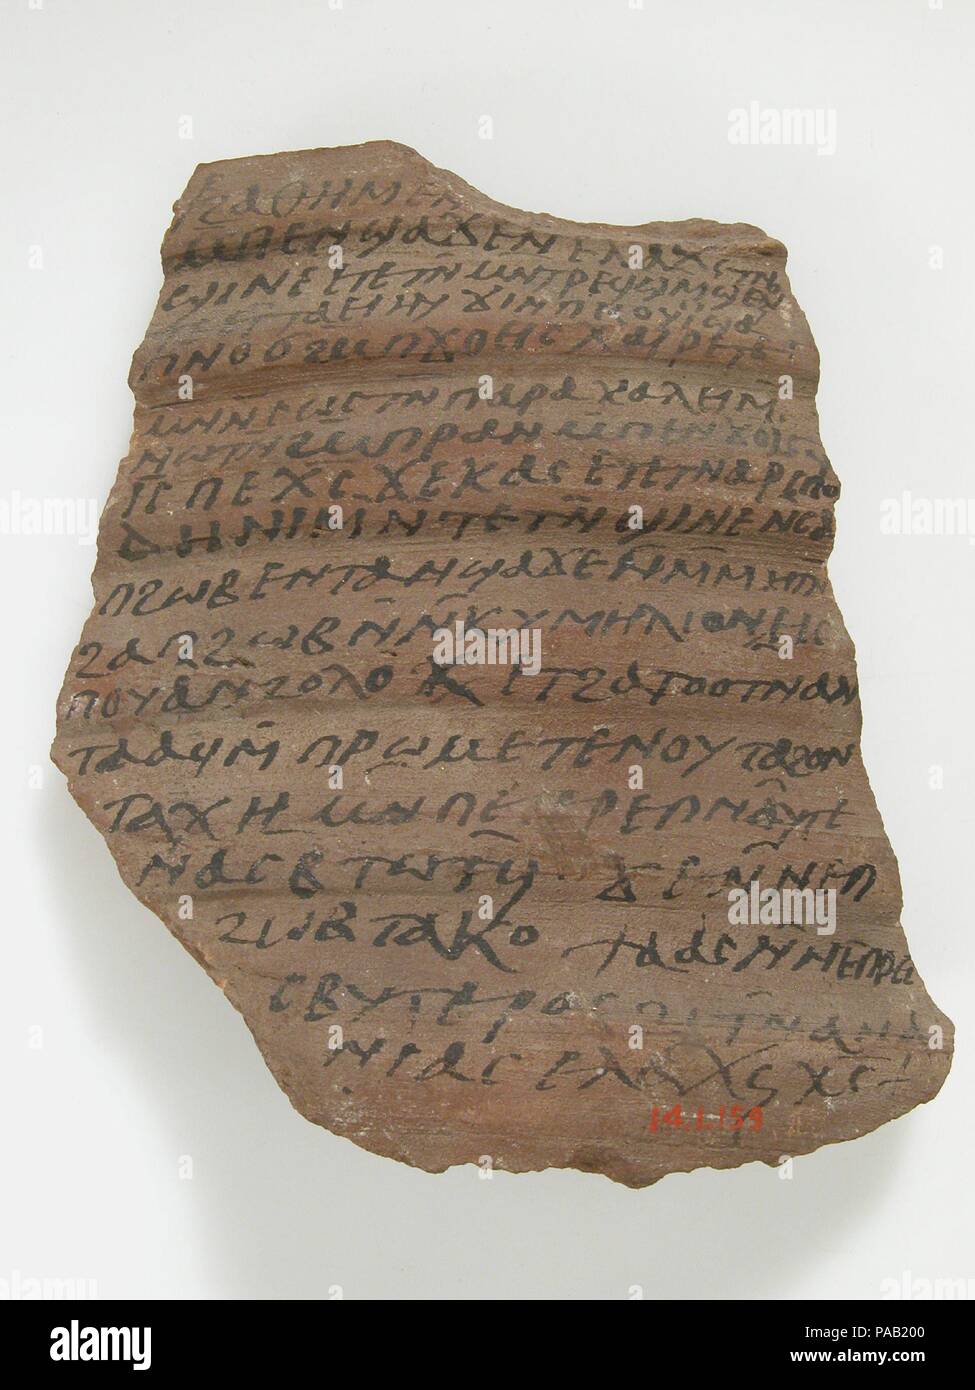 Ostrakon with a Letter from Ananias to Priests. Culture: Coptic. Dimensions: 4 7/16 x 3 5/8 in. (11.2 x 9.2 cm). Date: 600. Museum: Metropolitan Museum of Art, New York, USA. Stock Photo